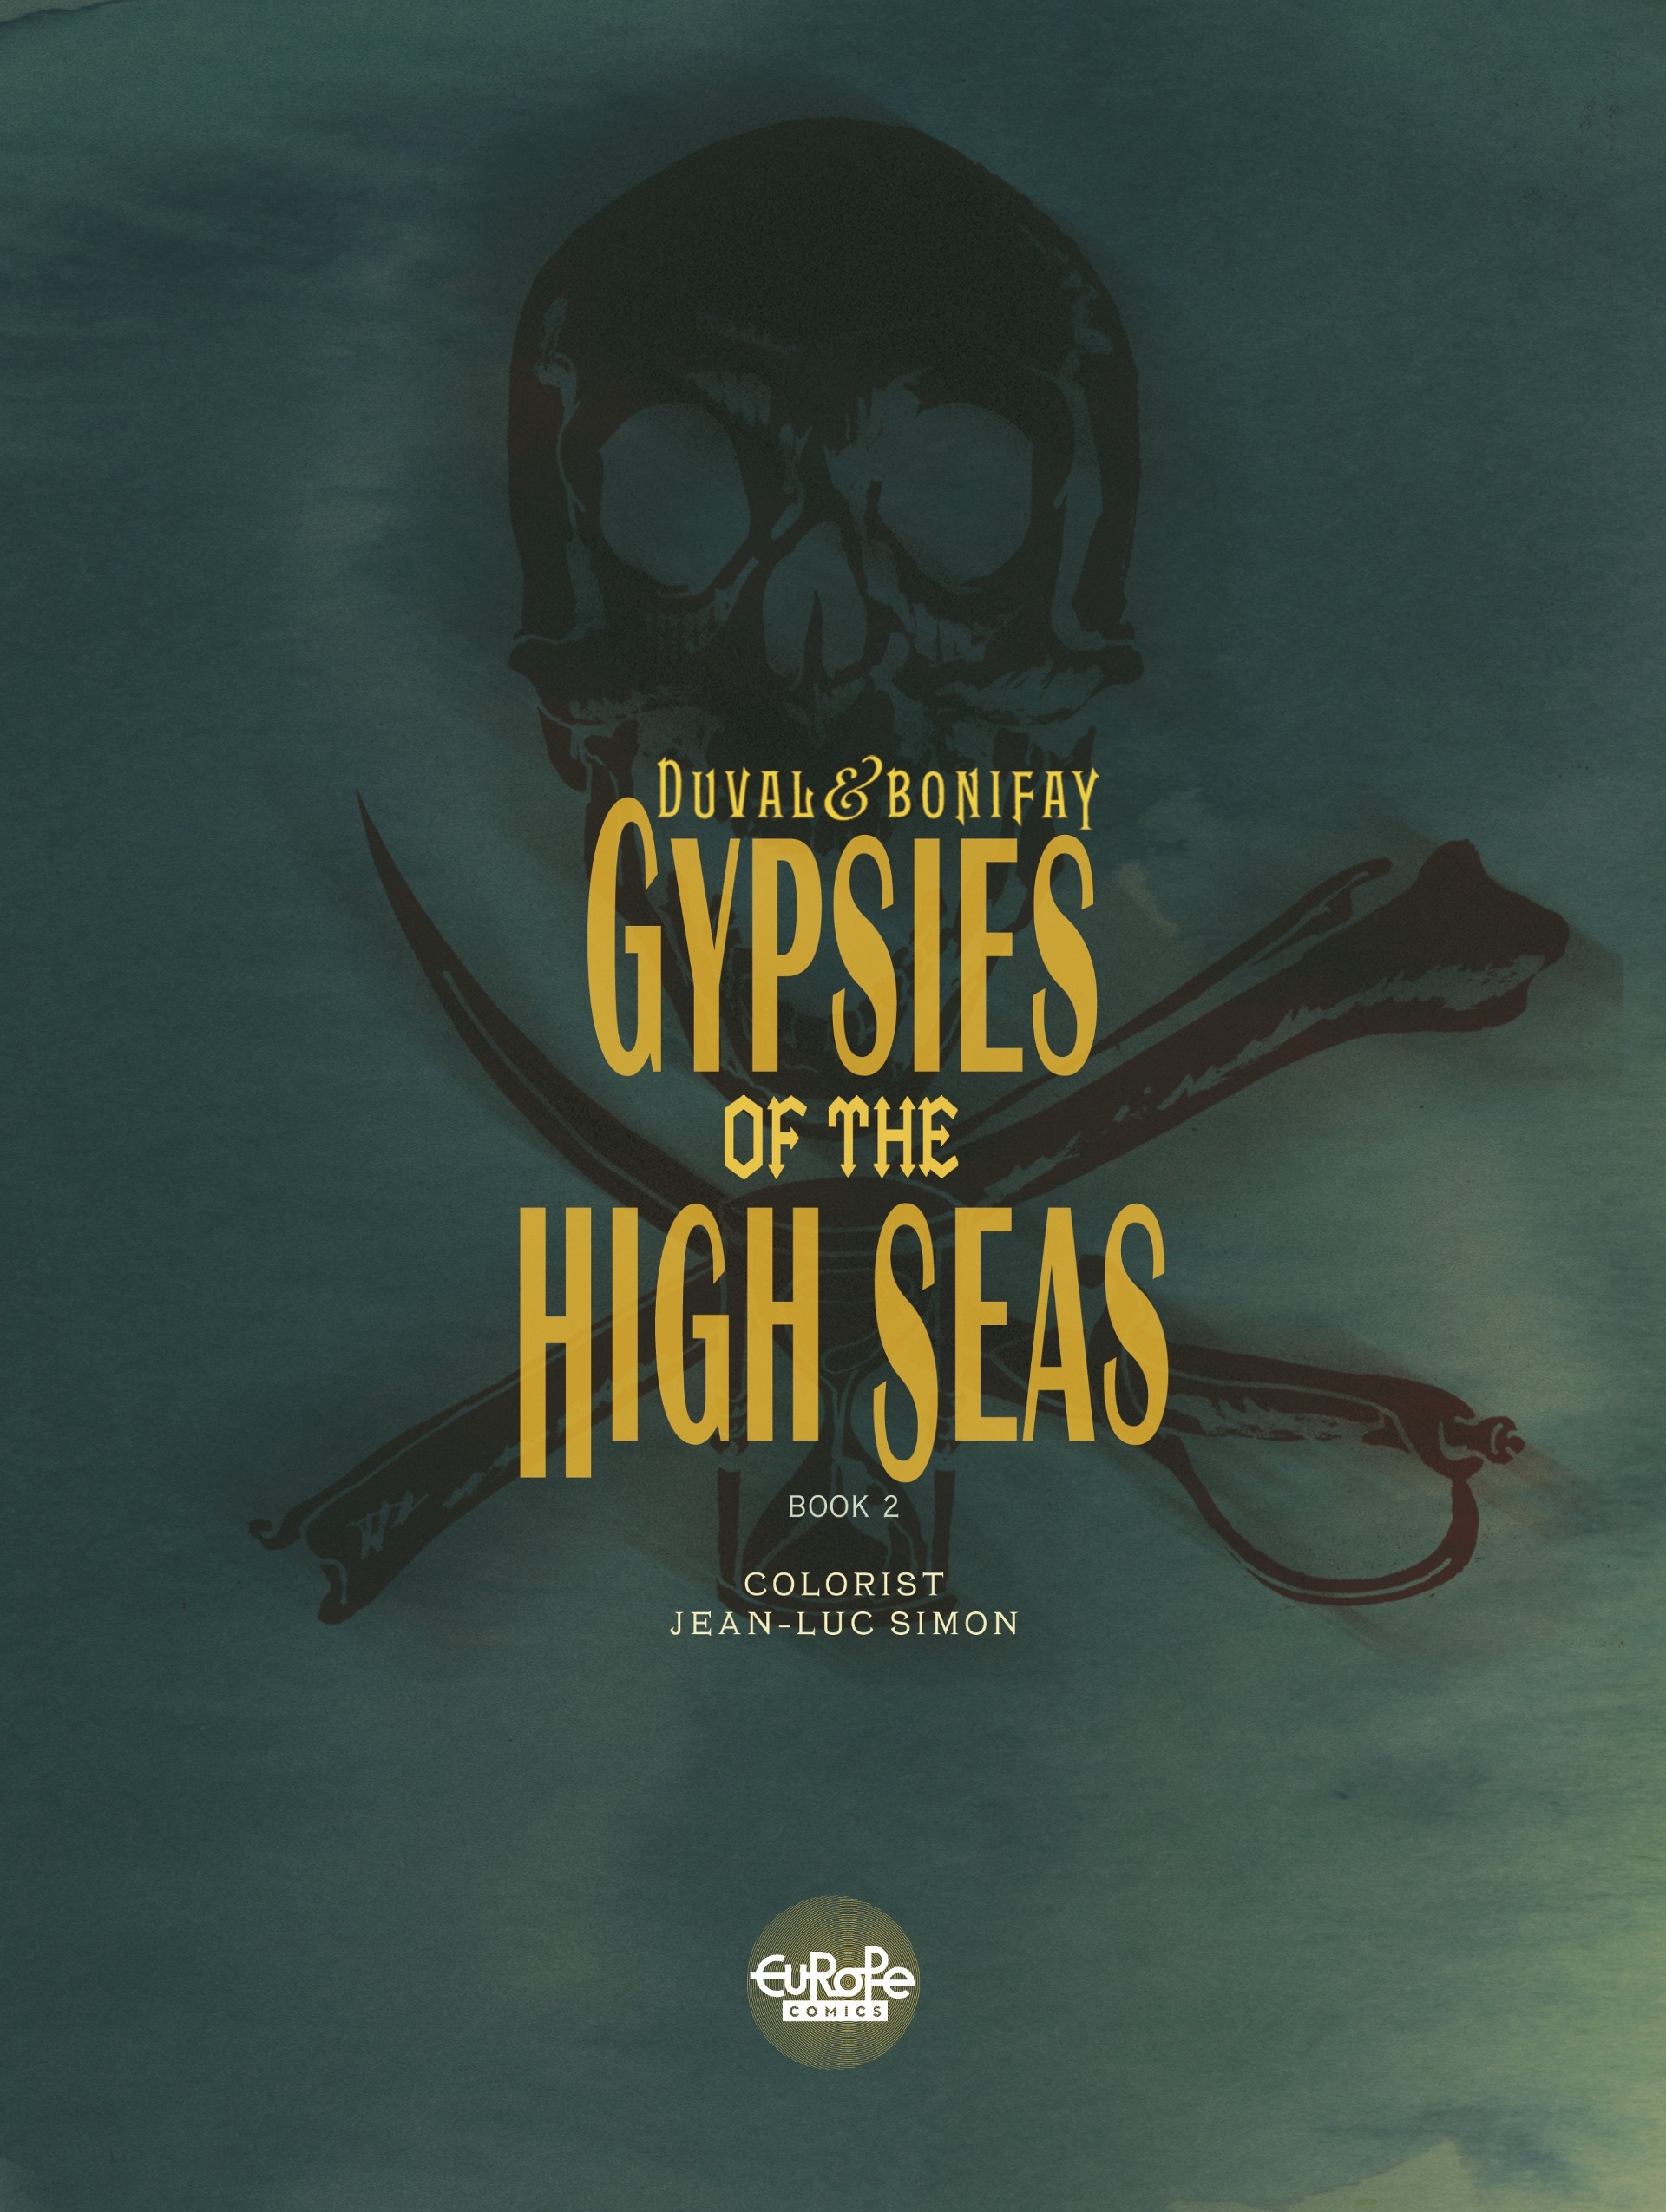 Read online Gypsies of the High Seas comic -  Issue # TPB 2 - 2